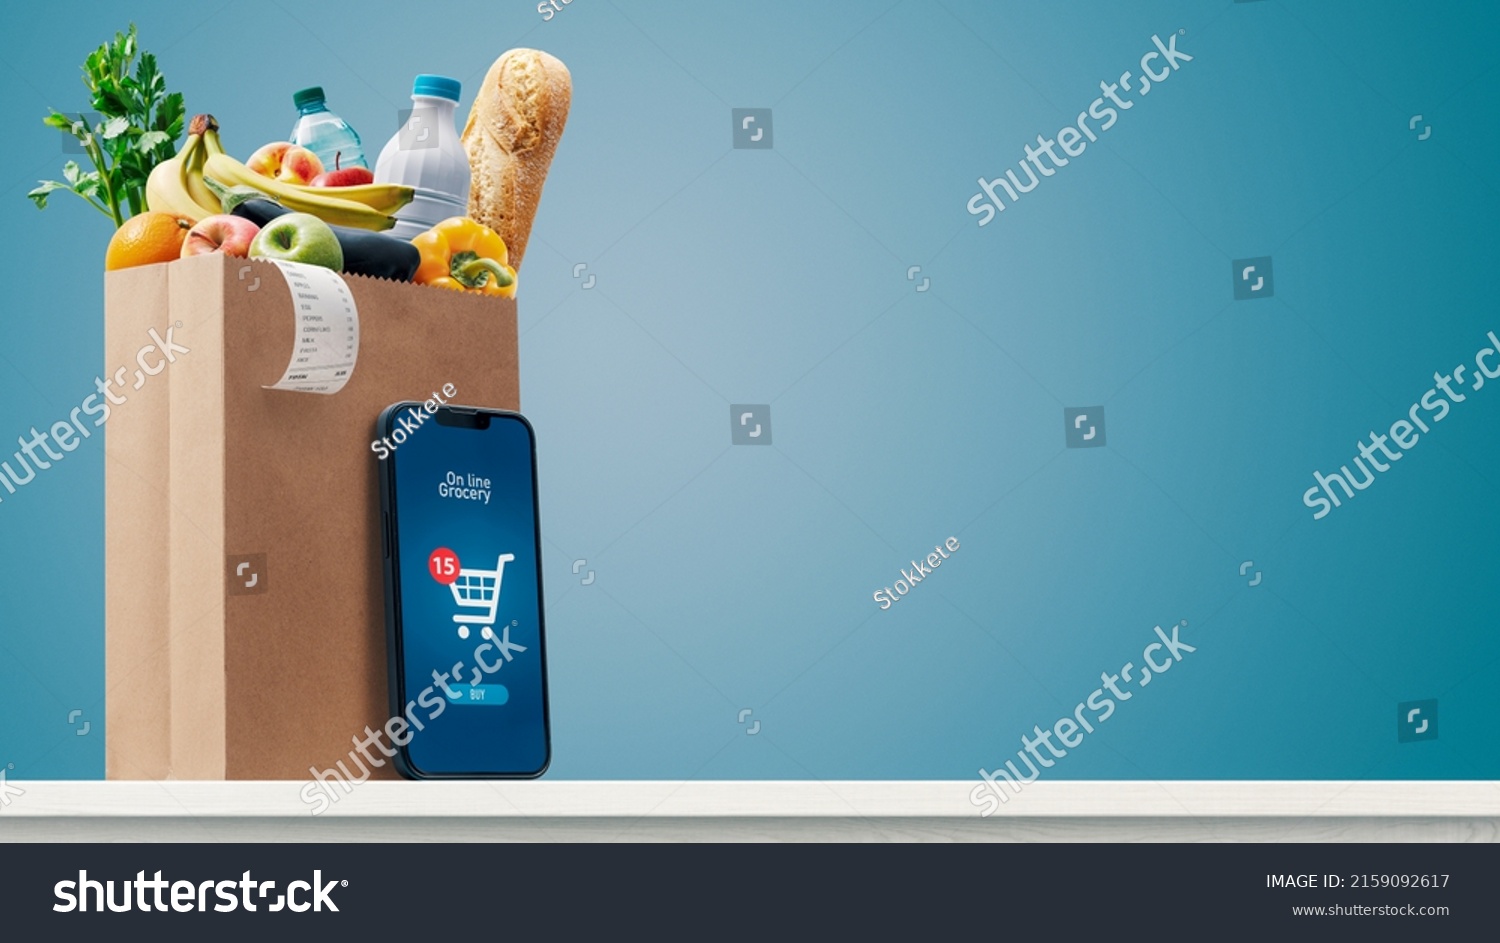 Grocery shopping app and grocery bag full of goods: online grocery shopping and home delivery concept, copy space #2159092617